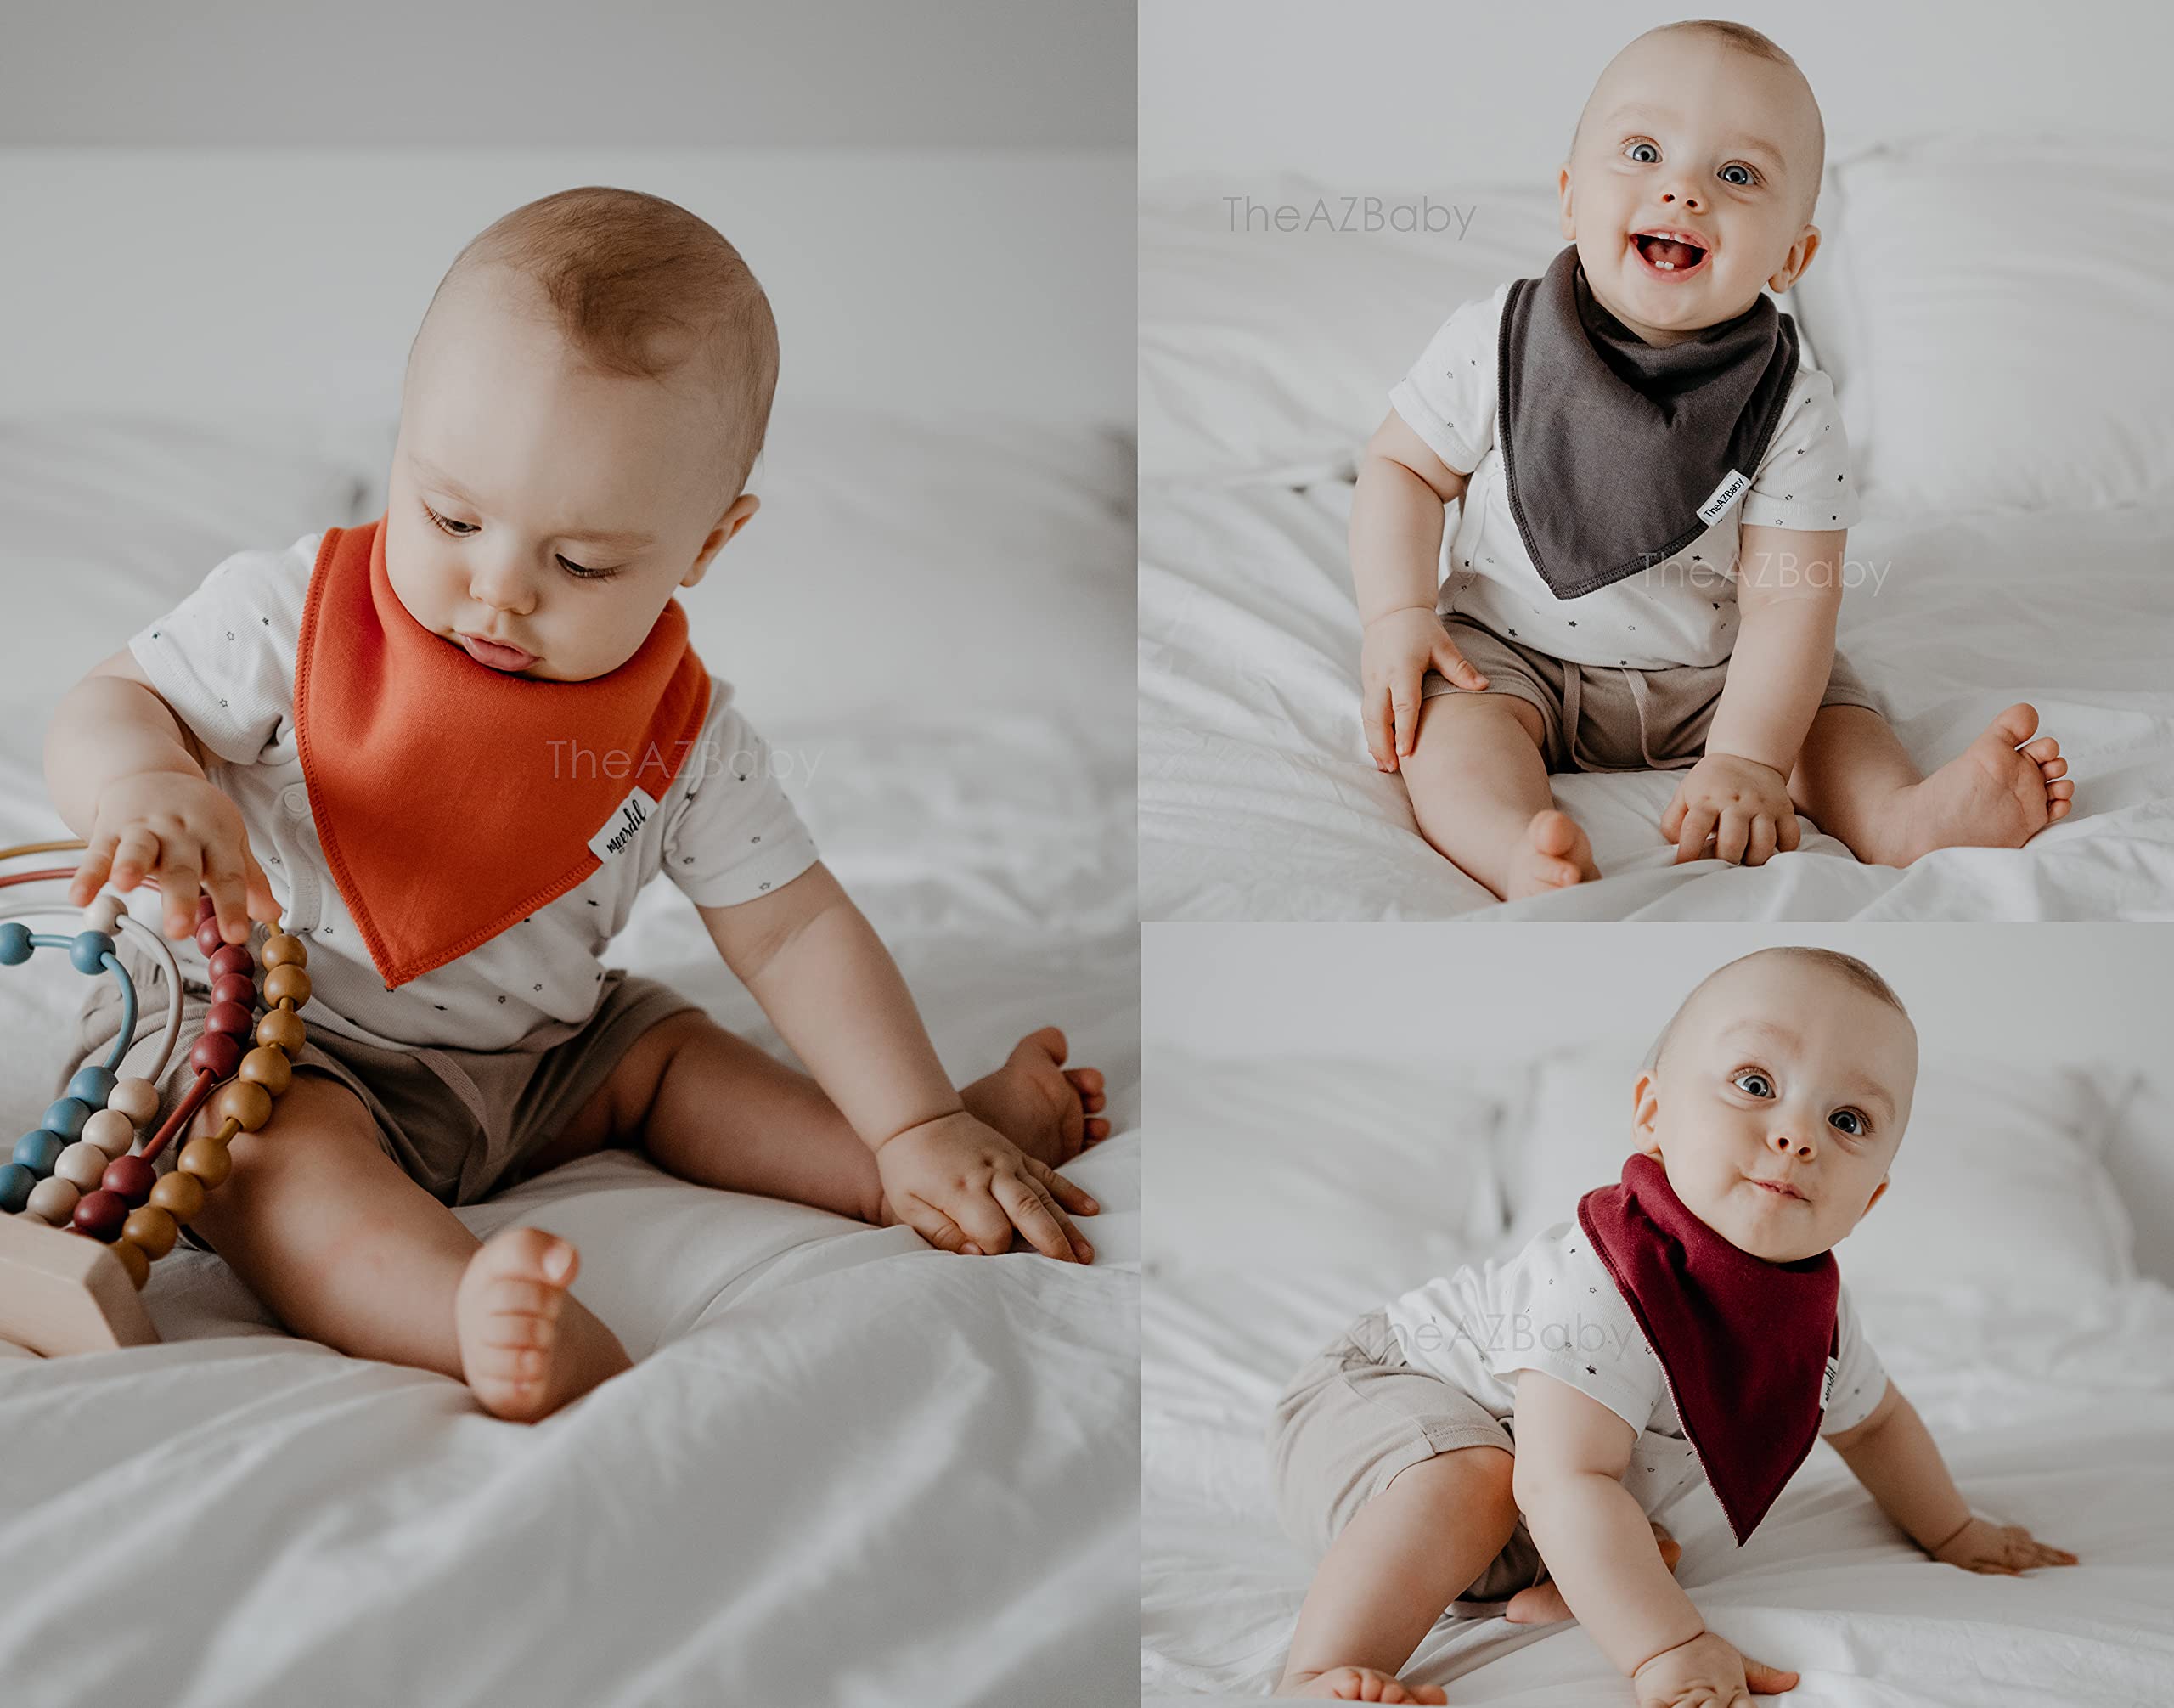 TheAZBaby Organic Cotton 10-Pack Baby Bandana Drool Bibs for Boys and Girls, Neutral Solid Bibs for Teething and Drooling.